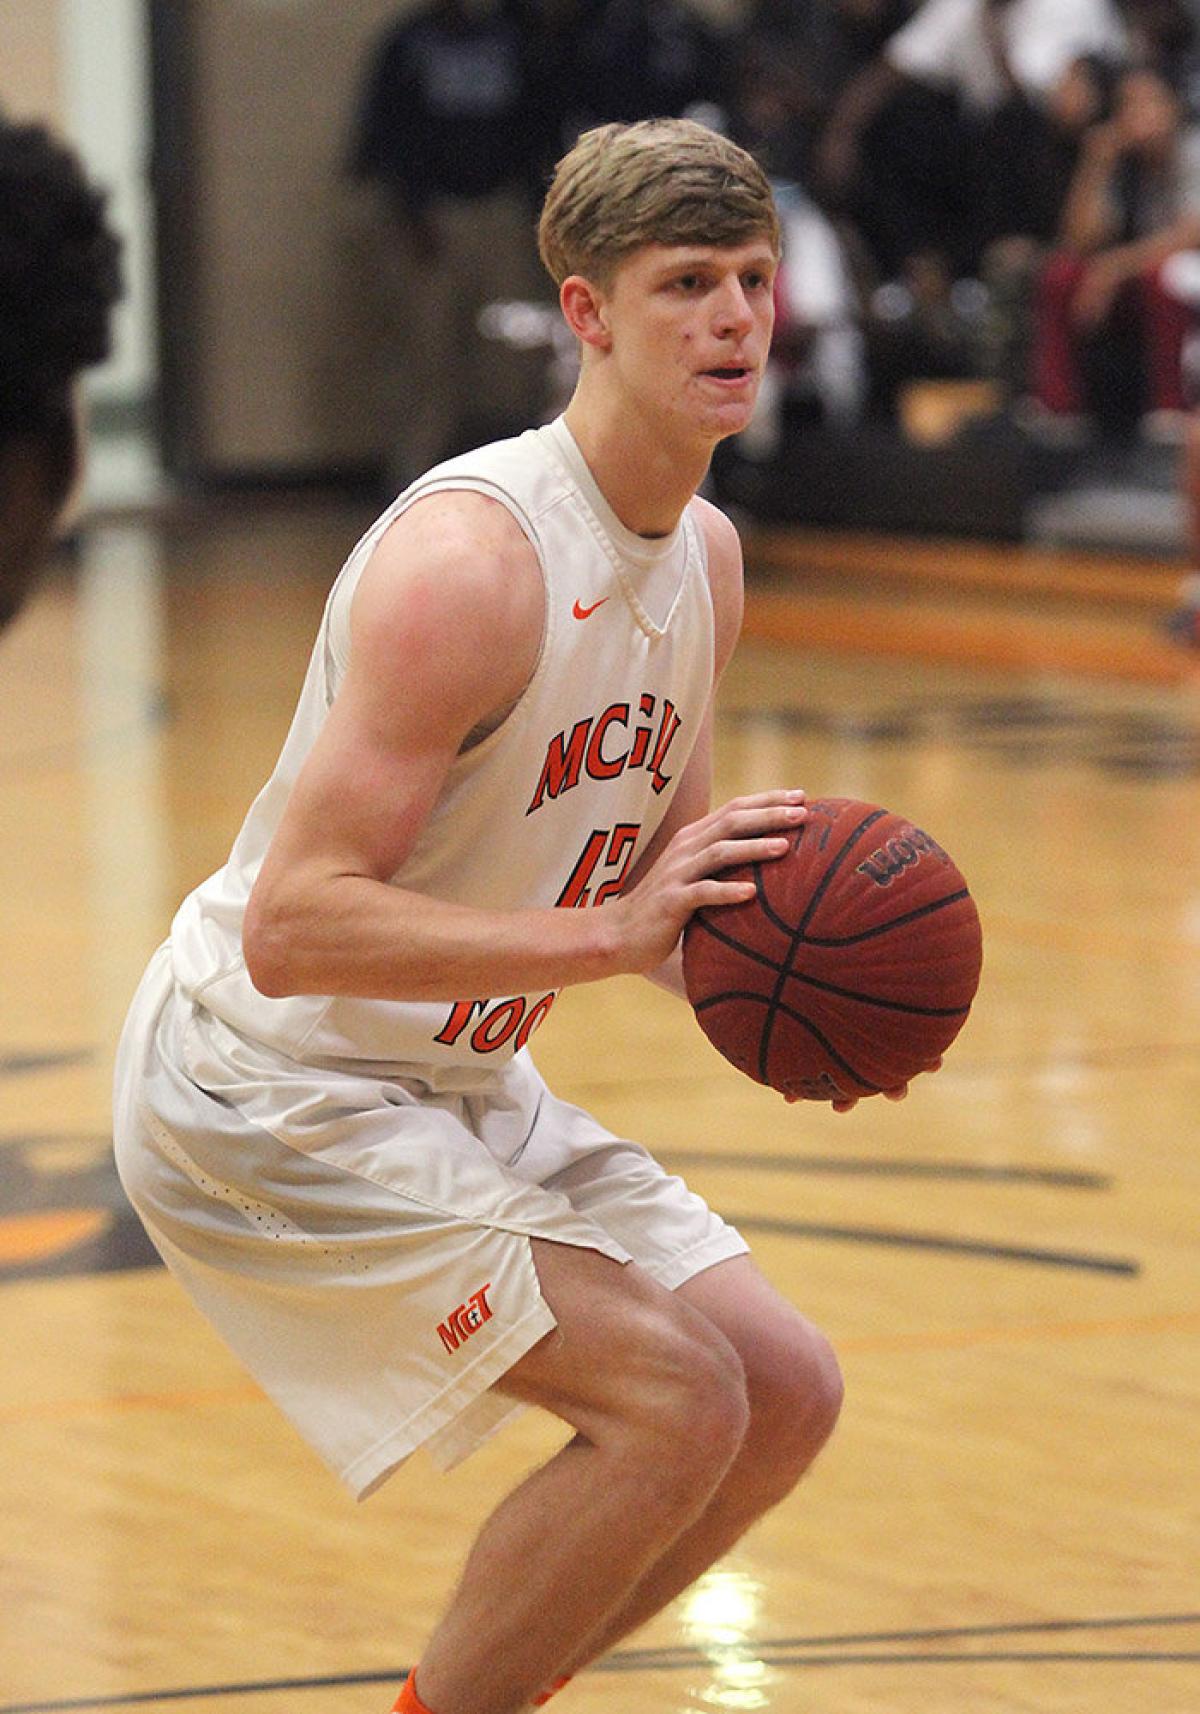 McT improves to 14-5; 1-0 with 68-36 win over Foley